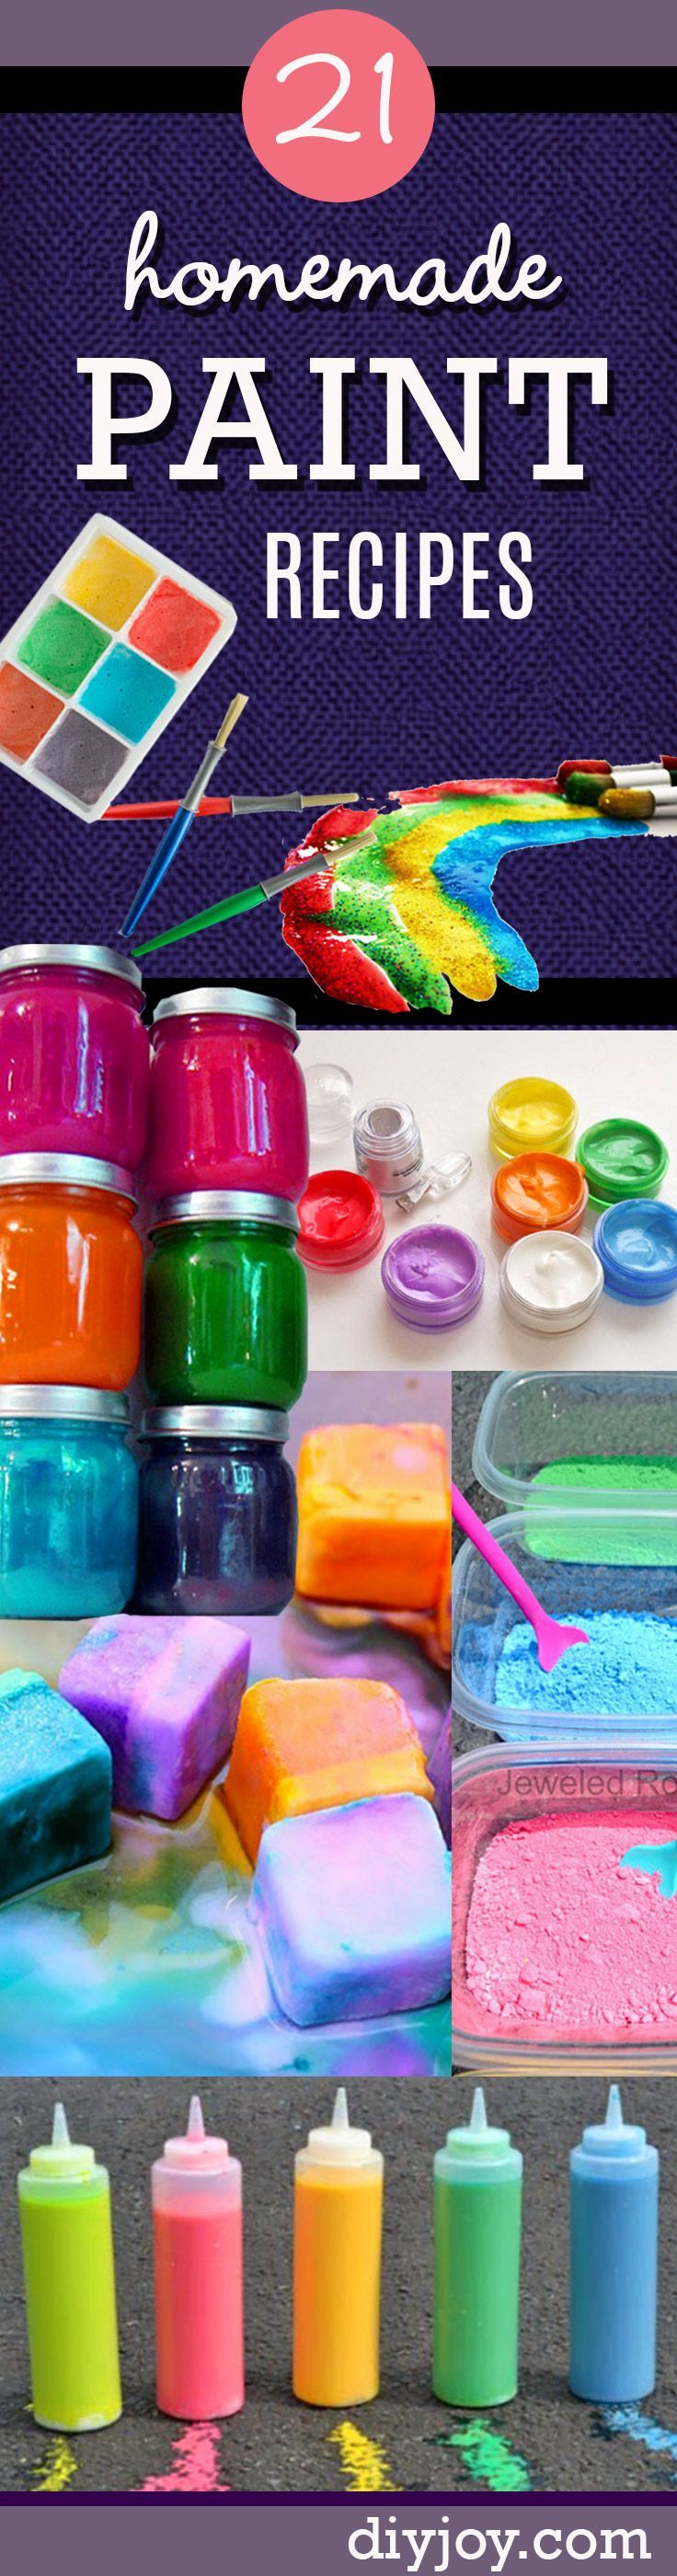 Homemade Crafts for Kids to Make at Home – Fun DIY Paint Recipes Your Kids Will Love for Cool Arts and Crafts Ideas